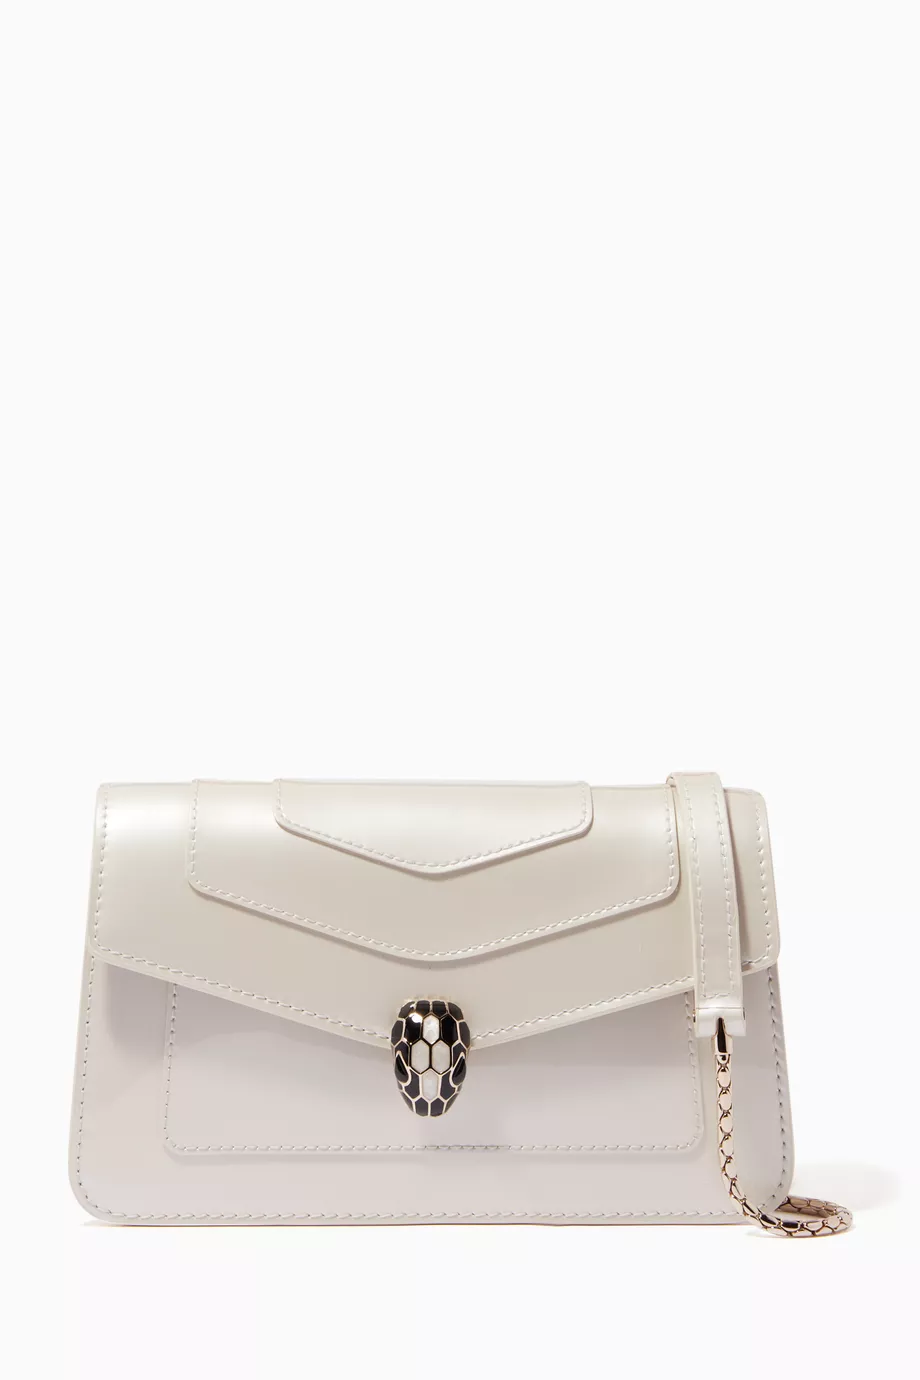 Bvlgari Serpenti Forever Wallet on Chain Leather Long at 1stDibs  serpenti  forever chain wallet, bvlgari serpenti card holder, bvlgari serpenti wallet  on chain